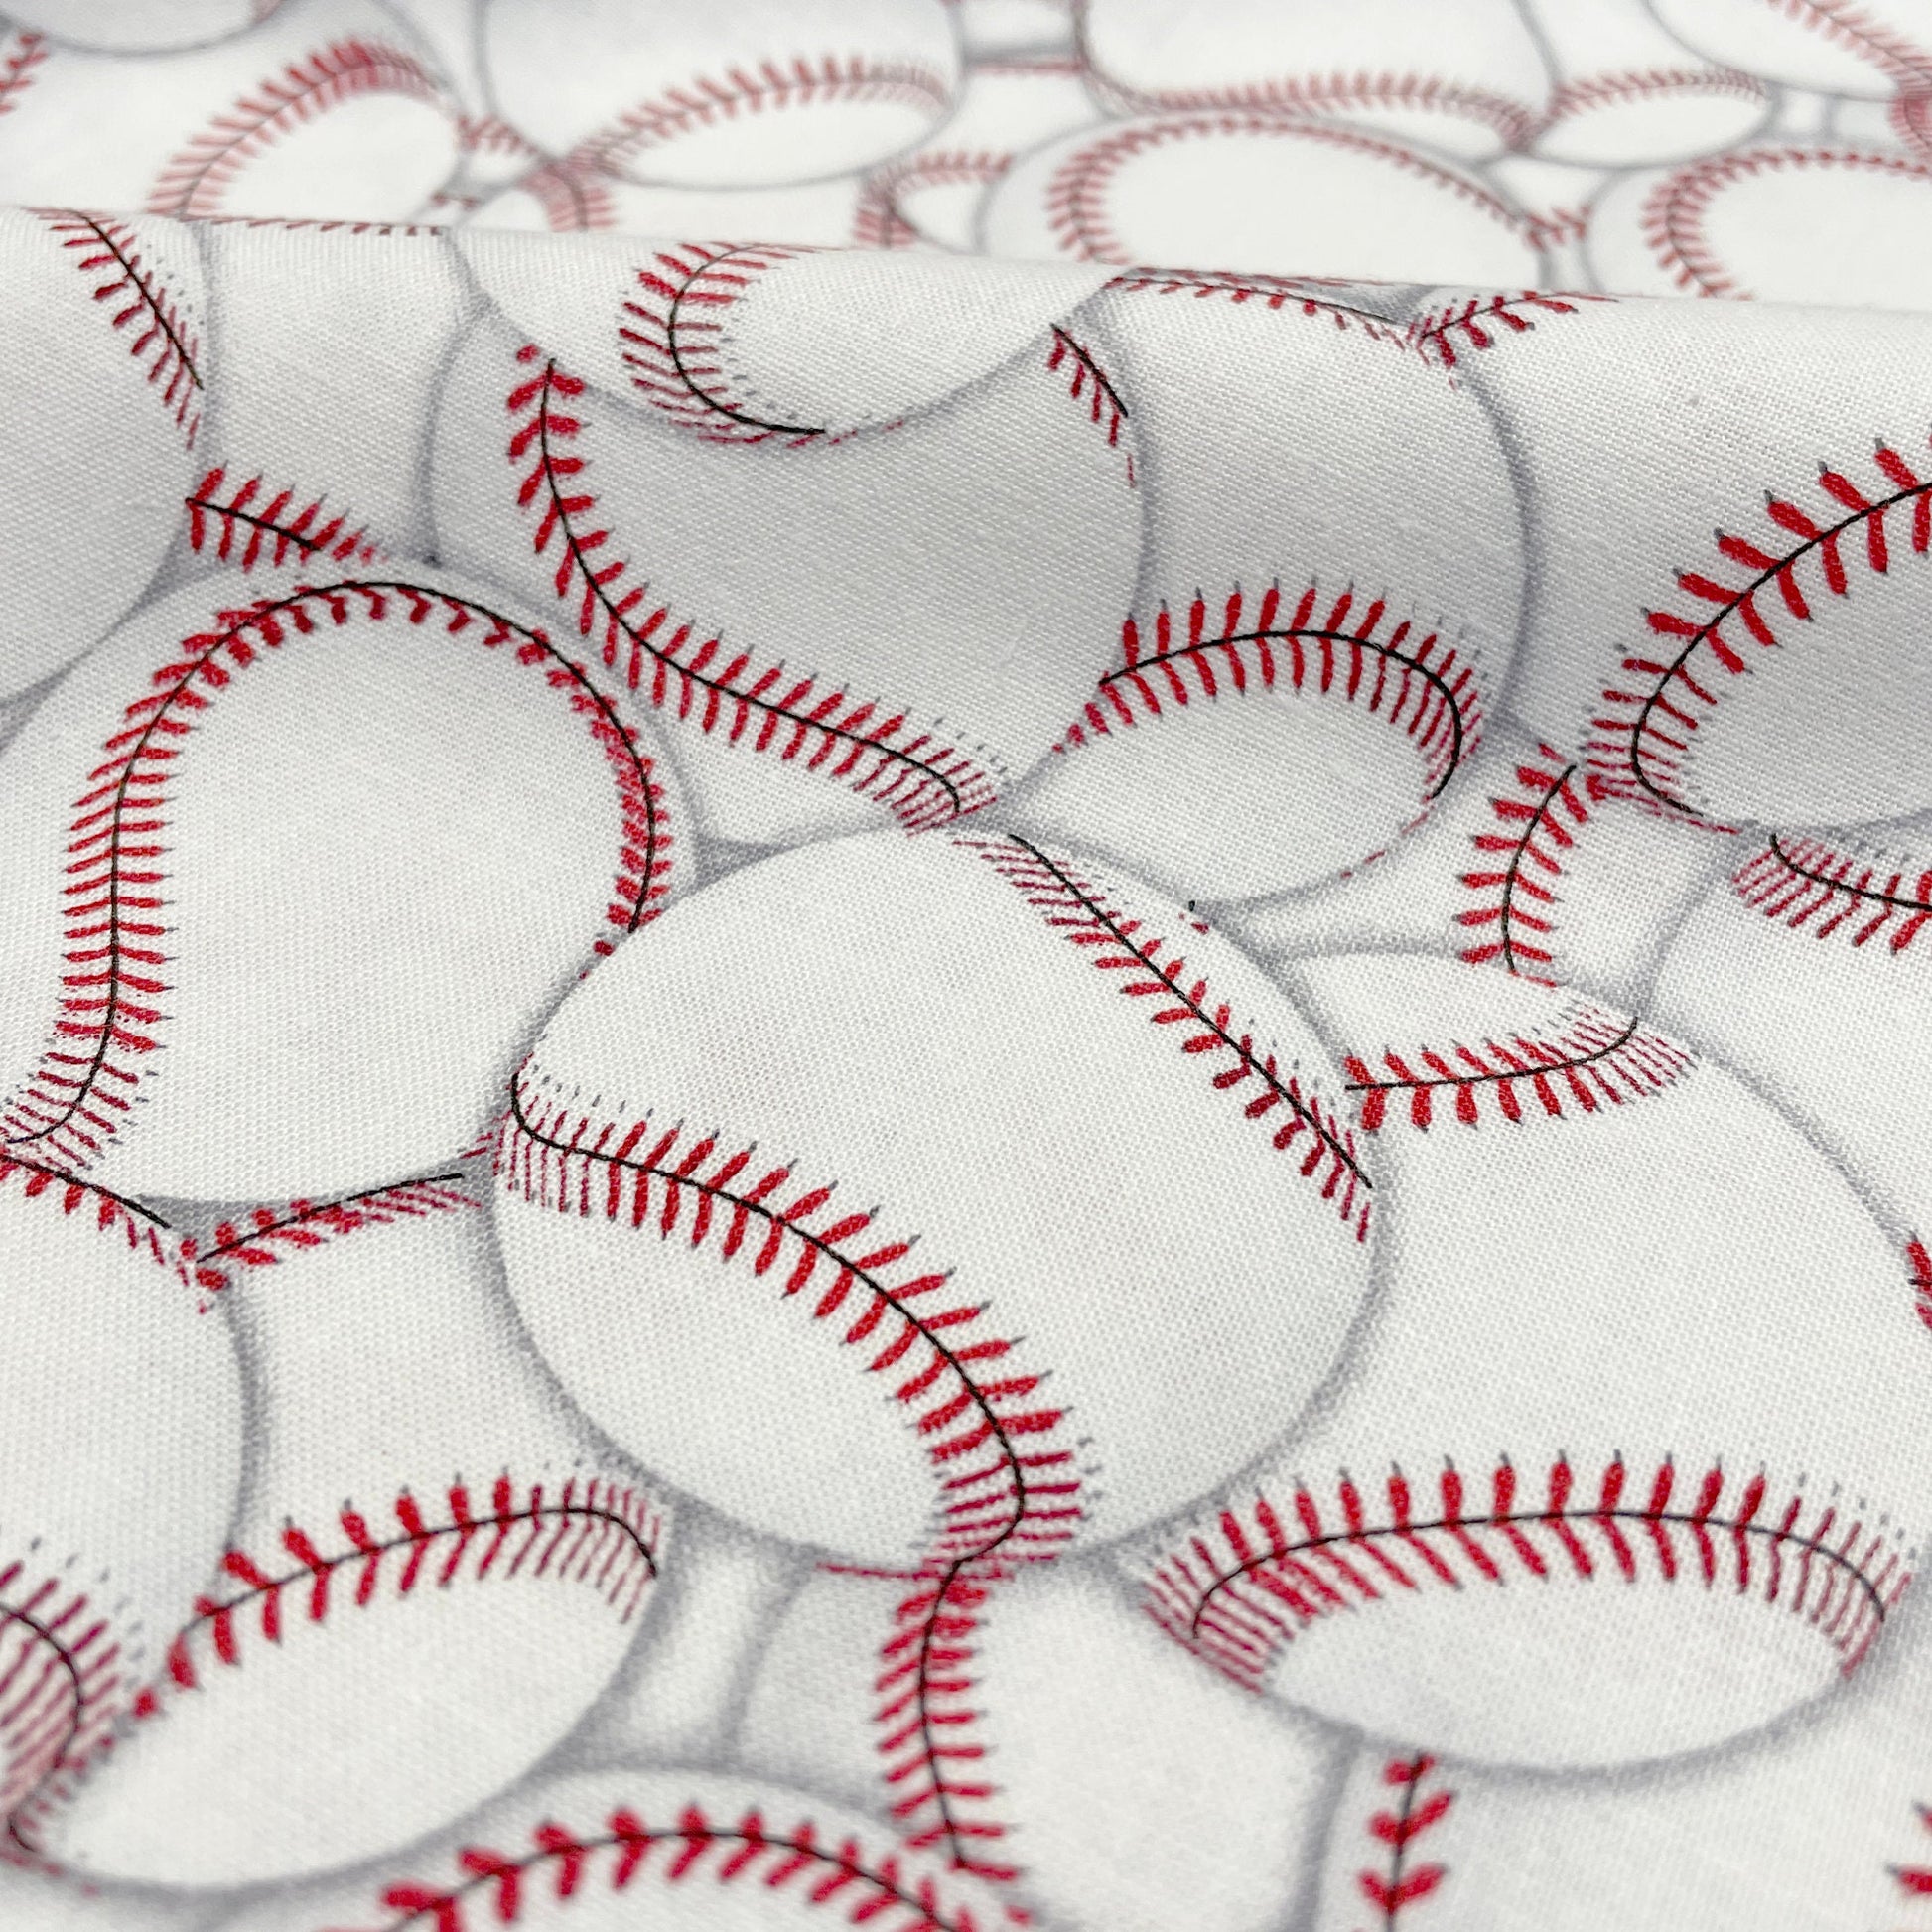 Baseball fabric - 100% Cotton Fabric from Timeless Treasures - Sports Fabric Baseball Material - SHIPS NEXT DAY